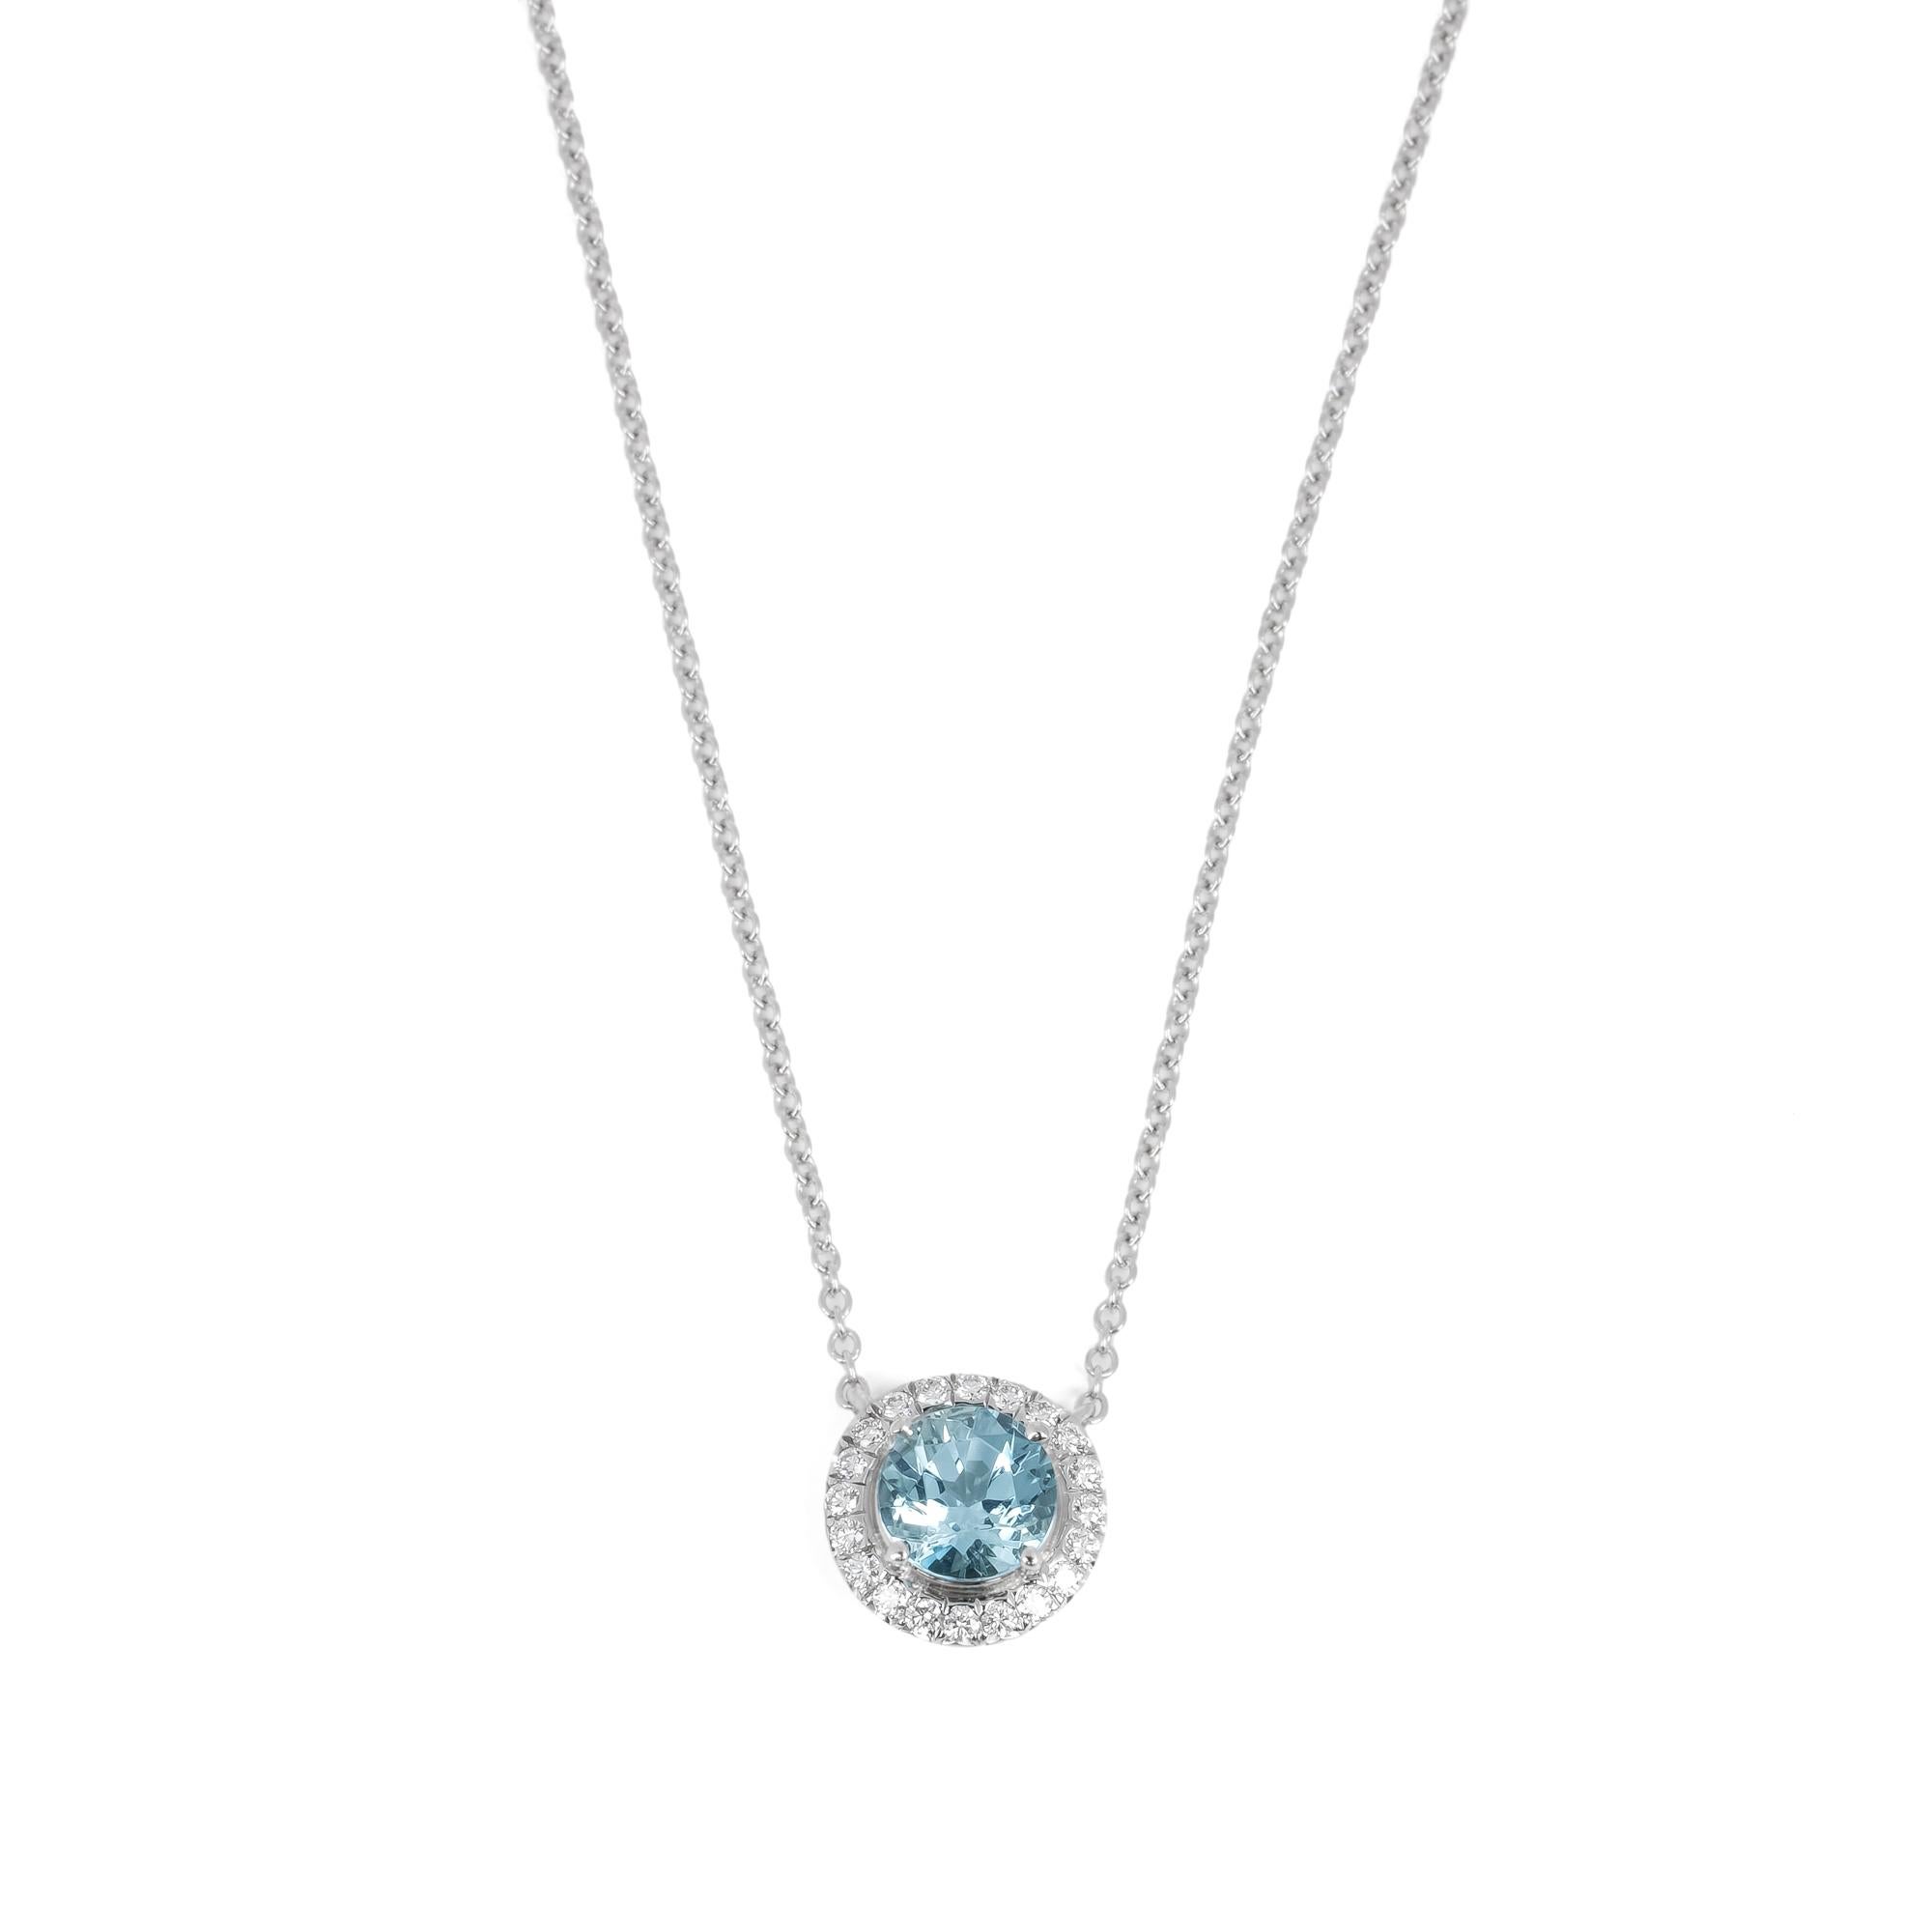 RRP	£3,625
ITEM CONDITION	Excellent
MANUFACTURER	Tiffany & Co.
MODEL	Soleste
MODEL REFERENCE	60005423
AGE	2022
GENDER	Women's
ACCOMPANIED BY	Tiffany Box & Receipt
NECKLACE LENGTH	41cm
PENDANT WIDTH	9.3mm
PENDANT LENGTH	9.3mm
CLASP TYPE	Spring